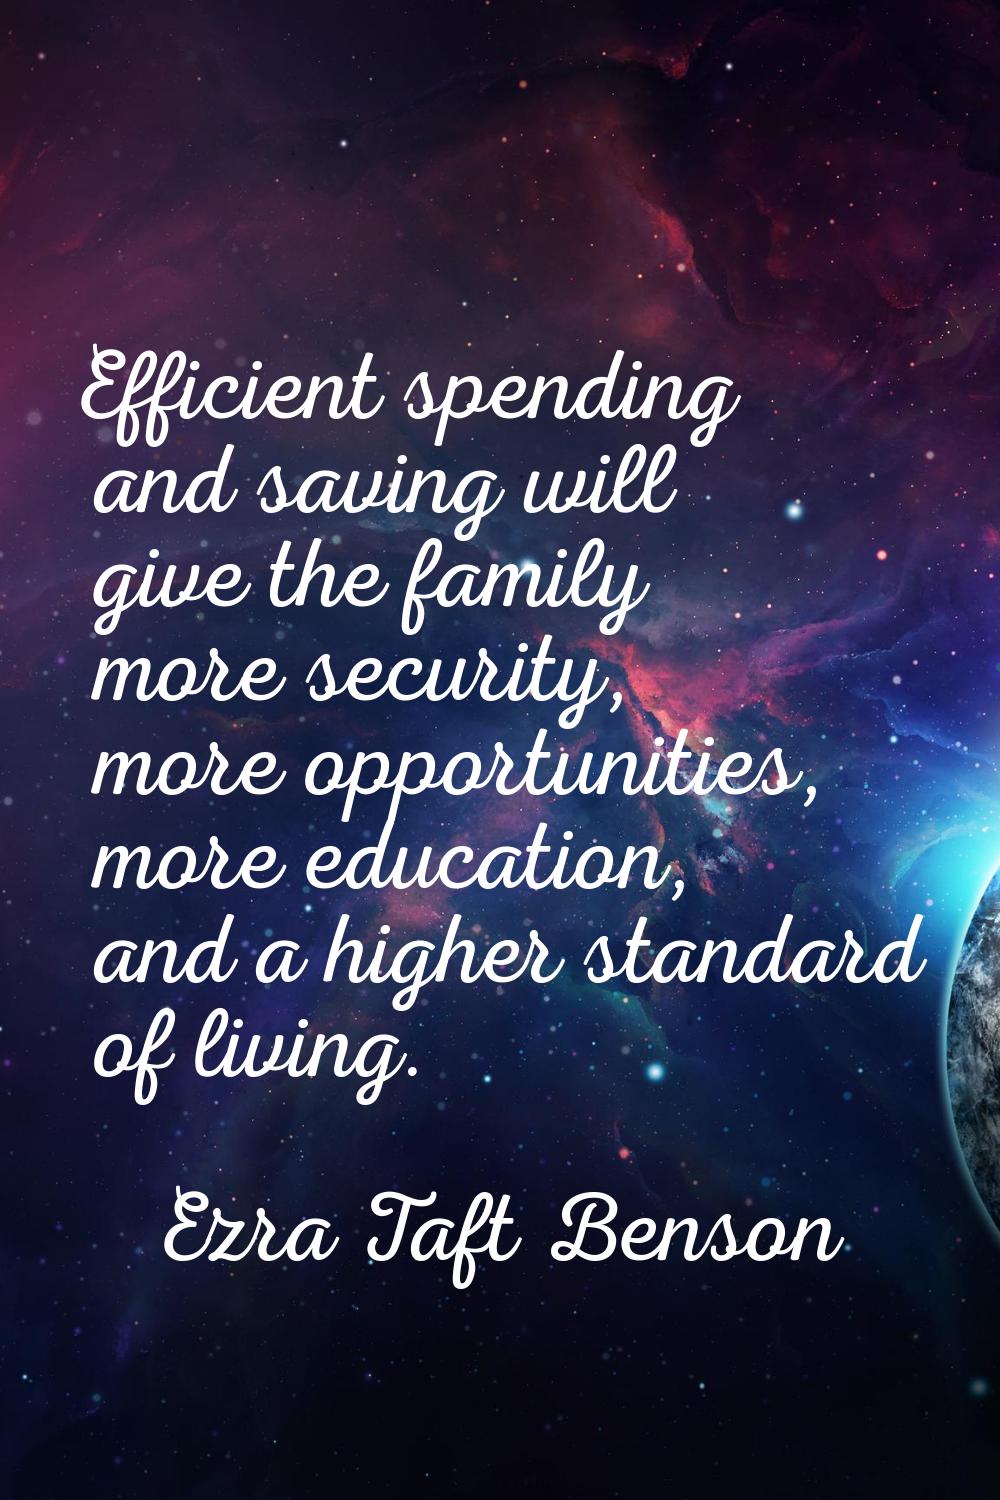 Efficient spending and saving will give the family more security, more opportunities, more educatio